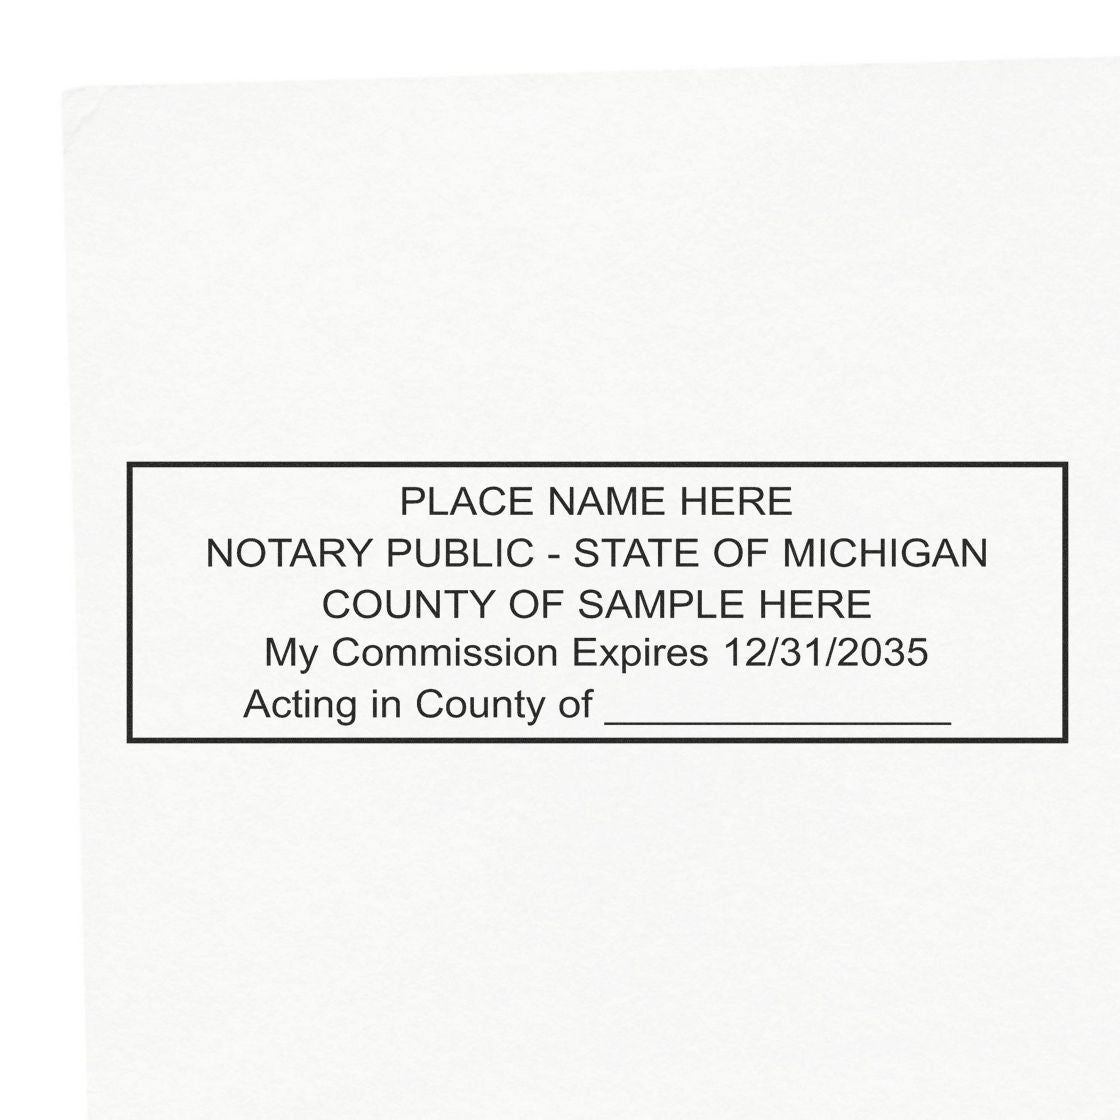 The Super Slim Michigan Notary Public Stamp stamp impression comes to life with a crisp, detailed photo on paper - showcasing true professional quality.